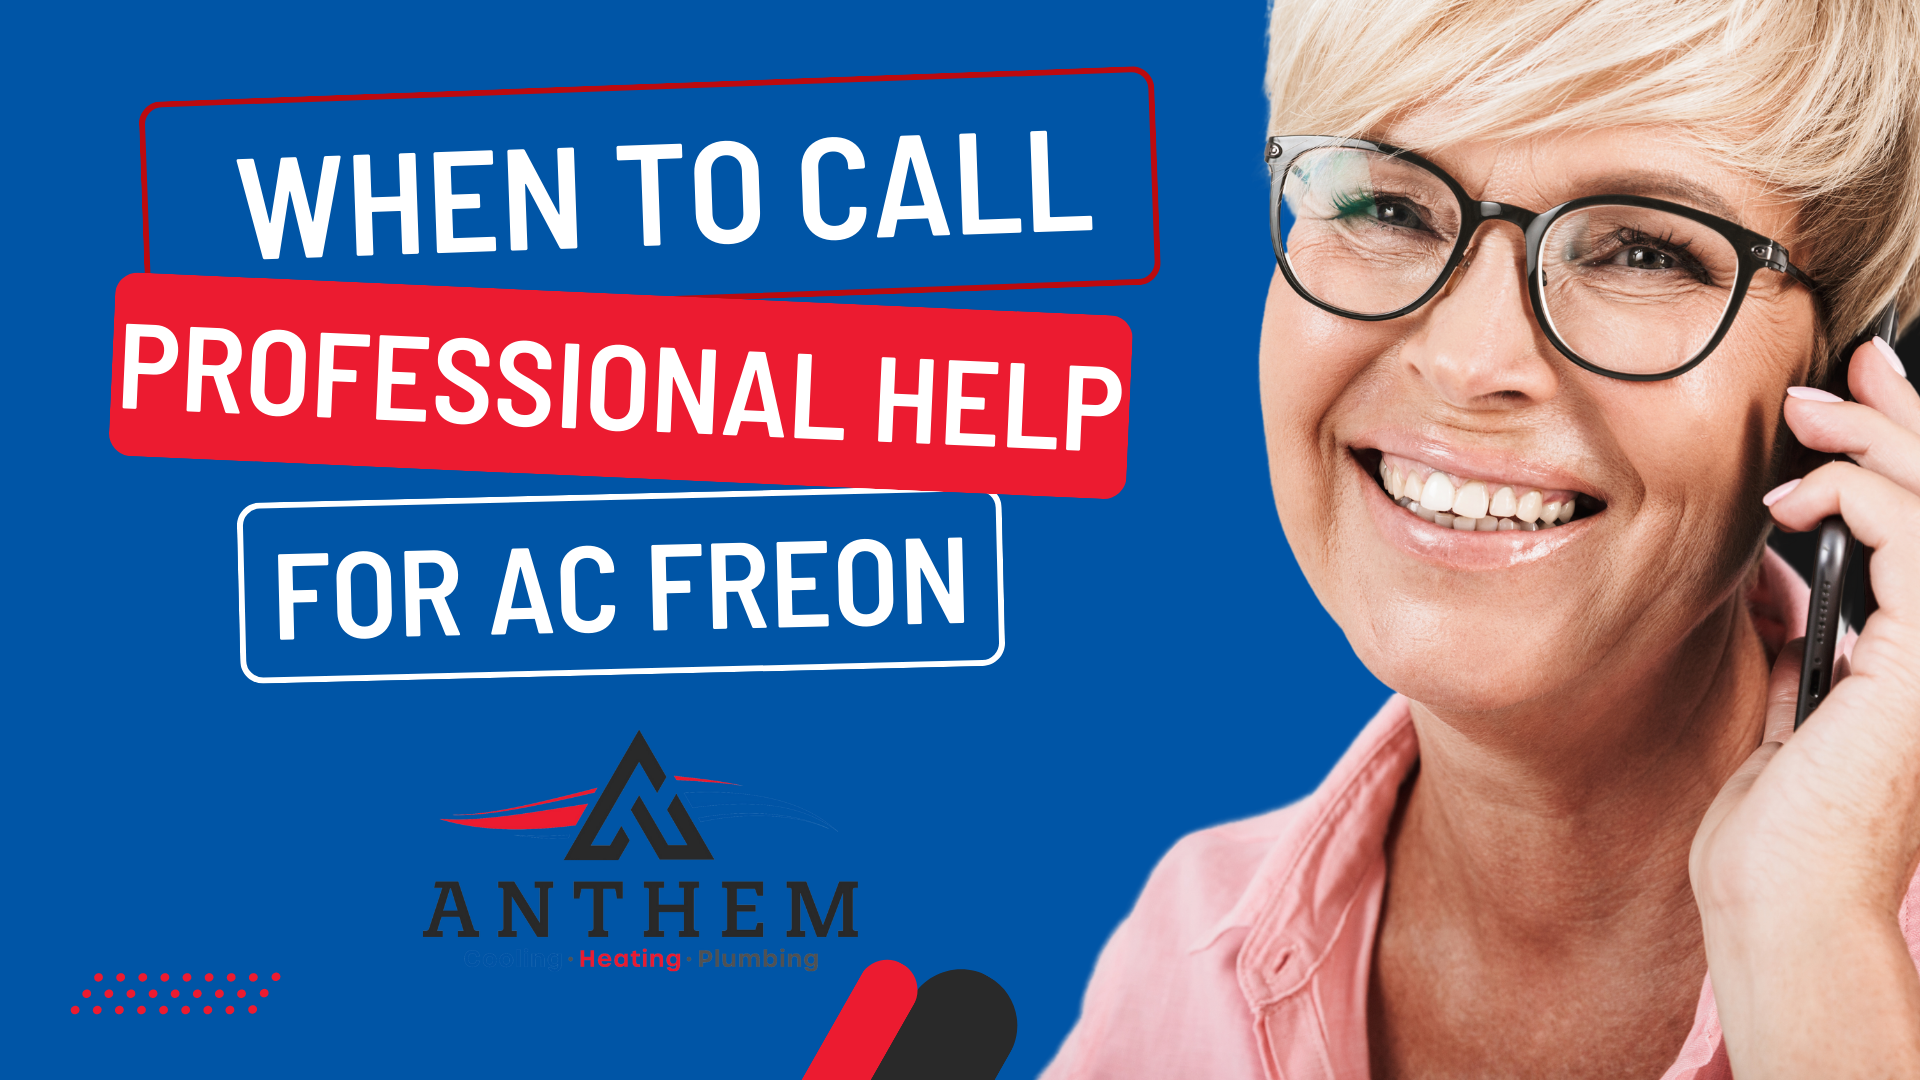 When to Call Professional Help for AC Freon